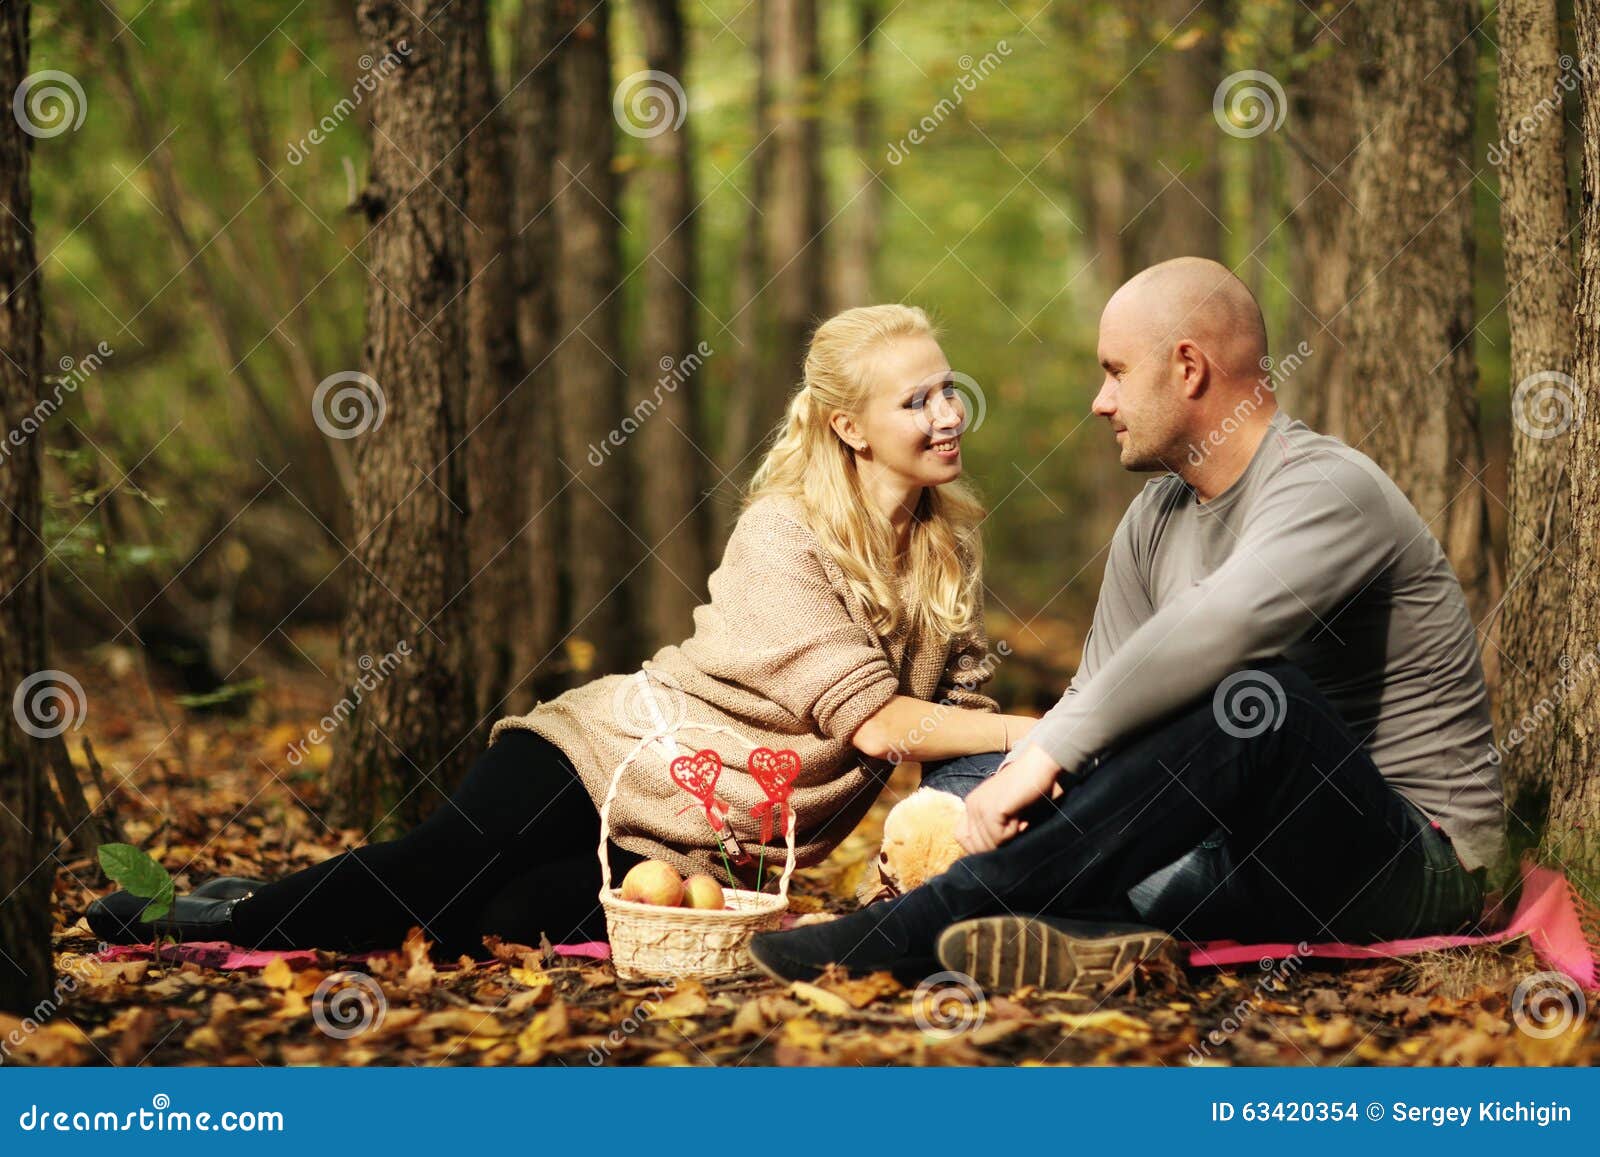 Man and woman on nature stock photo. Image of people 63420354